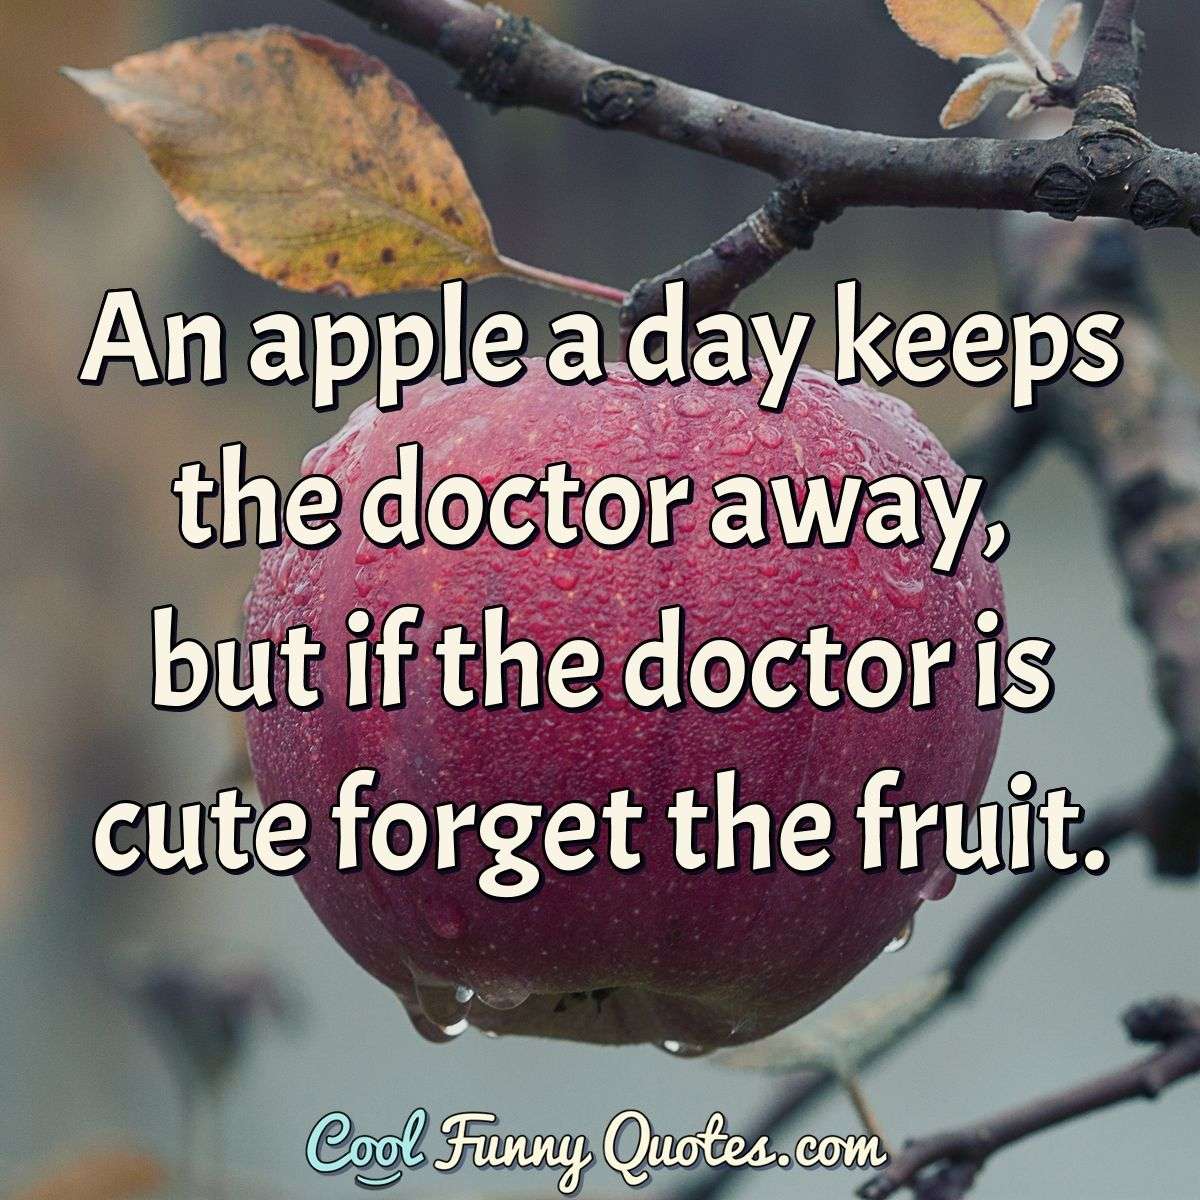 An apple a day keeps the doctor away, but if the doctor is cute ...